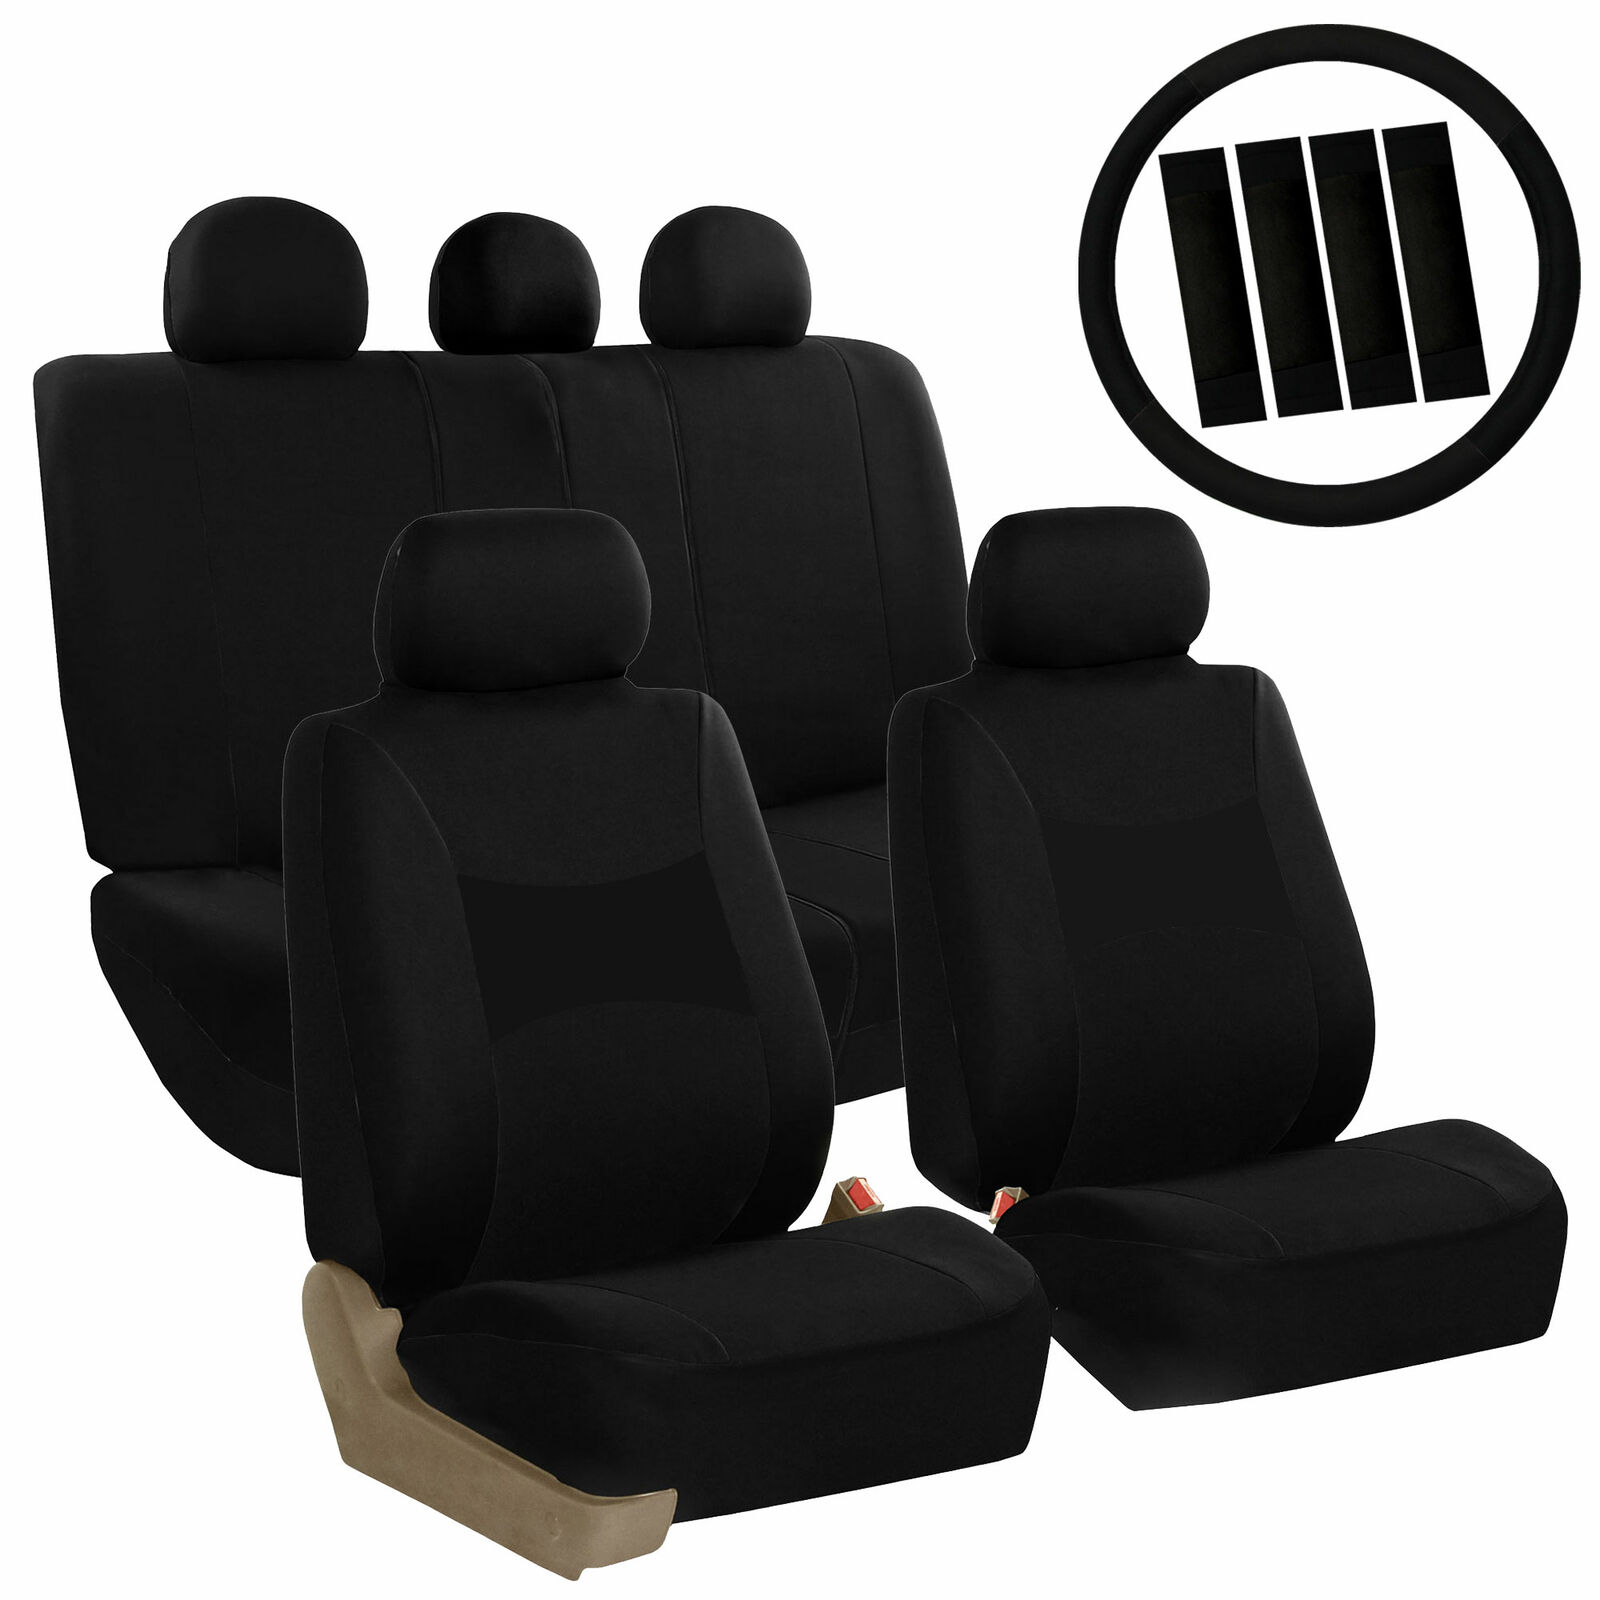 Light and Breezy Car Seat Covers Black Set for Auto - 14 Pc Set